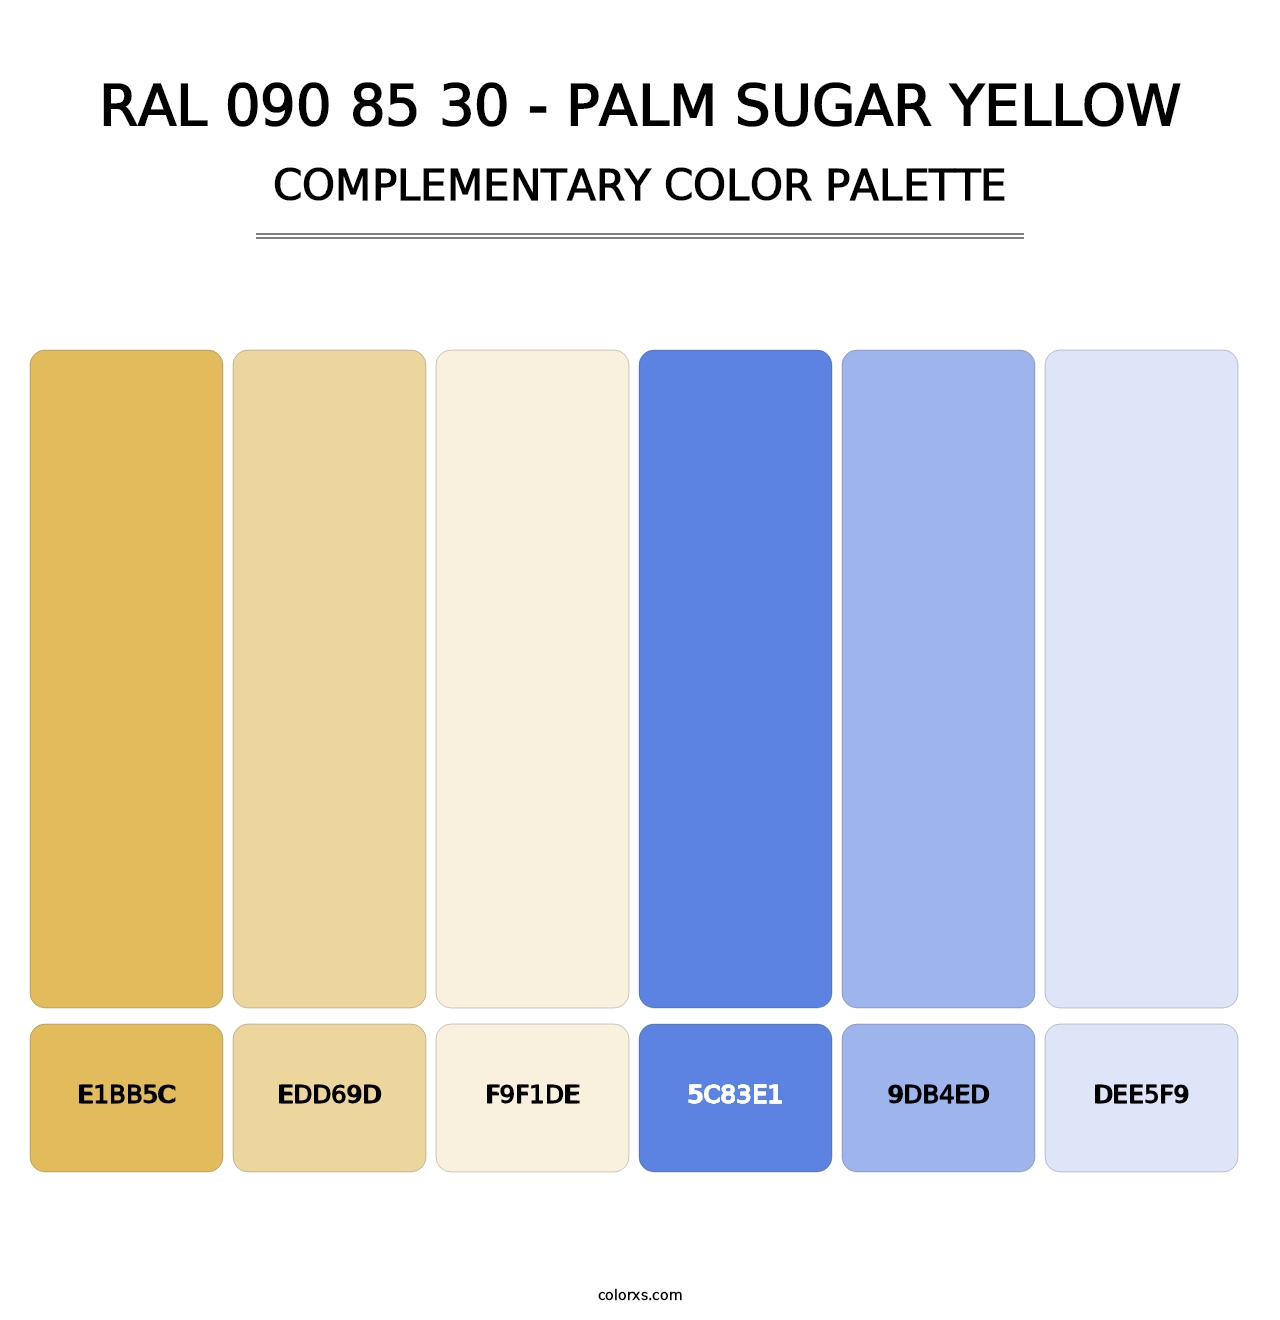 RAL 090 85 30 - Palm Sugar Yellow - Complementary Color Palette